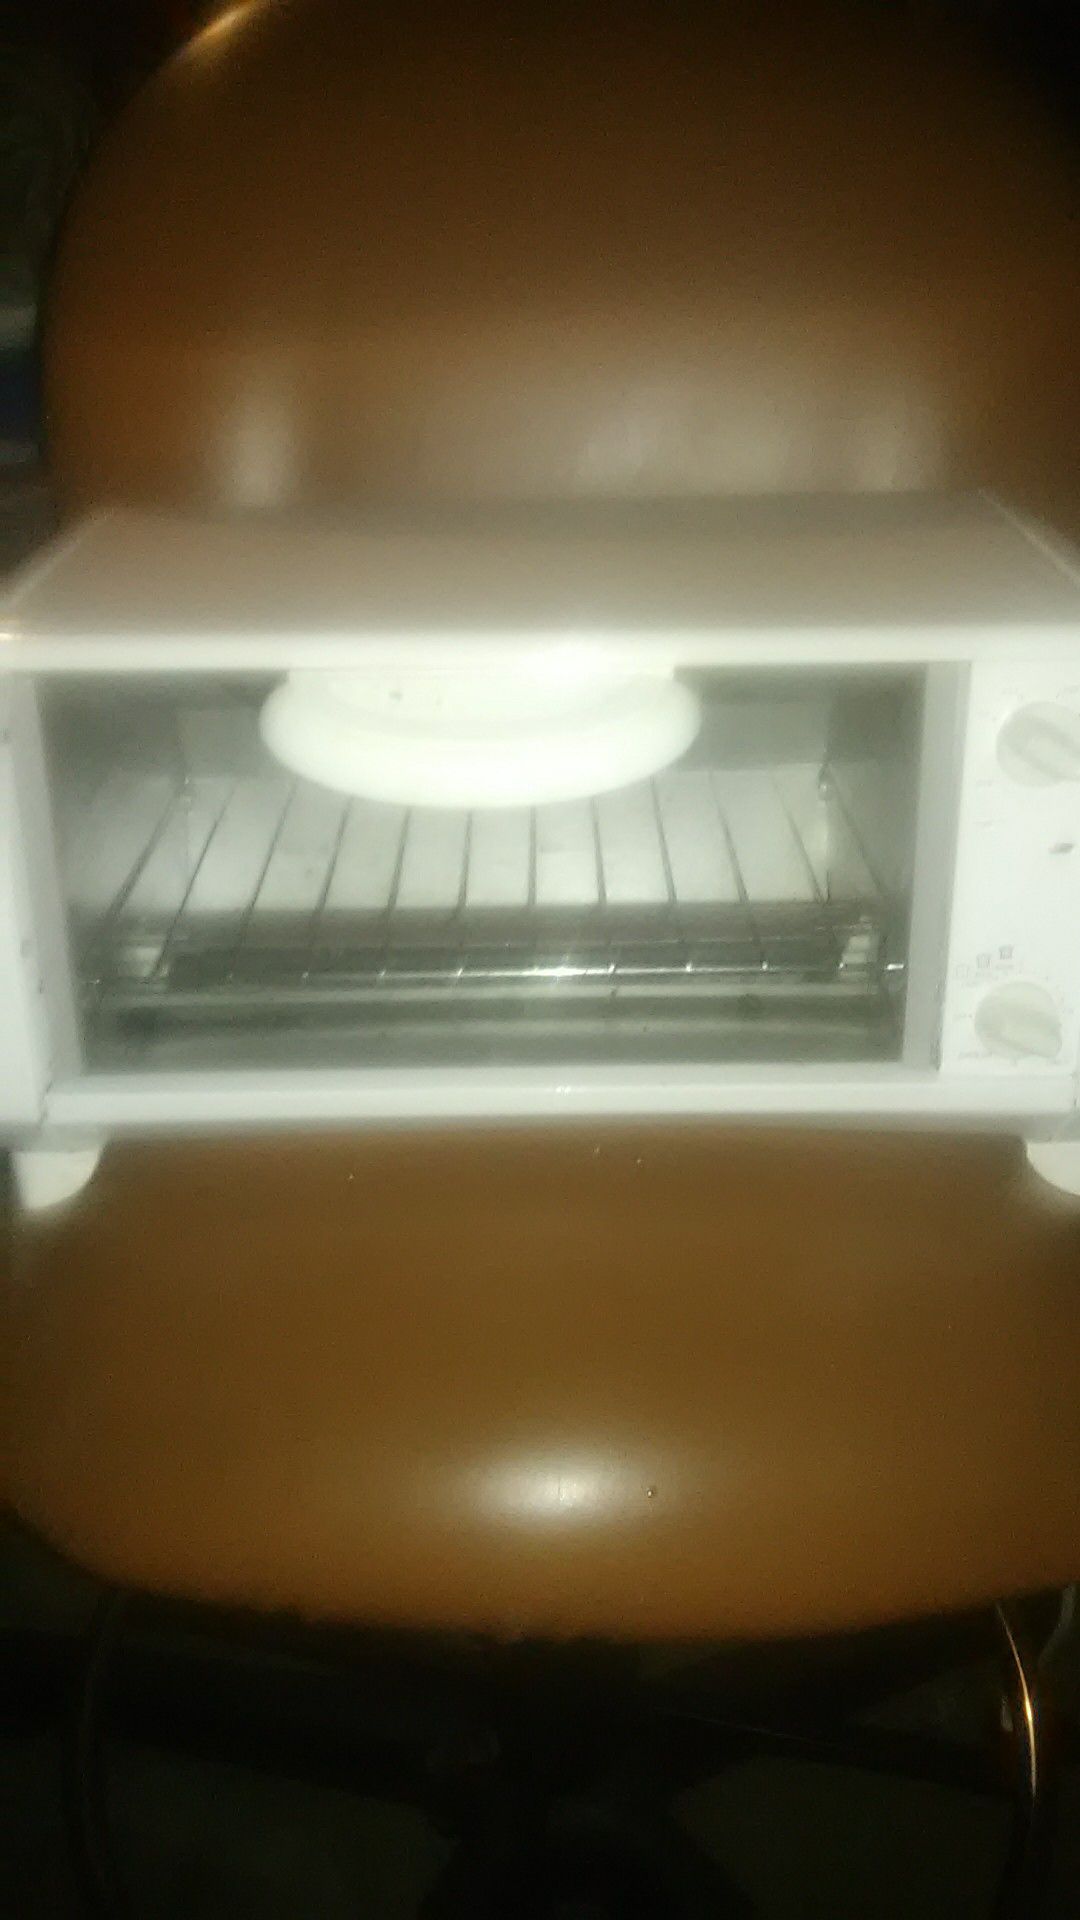 White-Westinghouse Toaster Oven